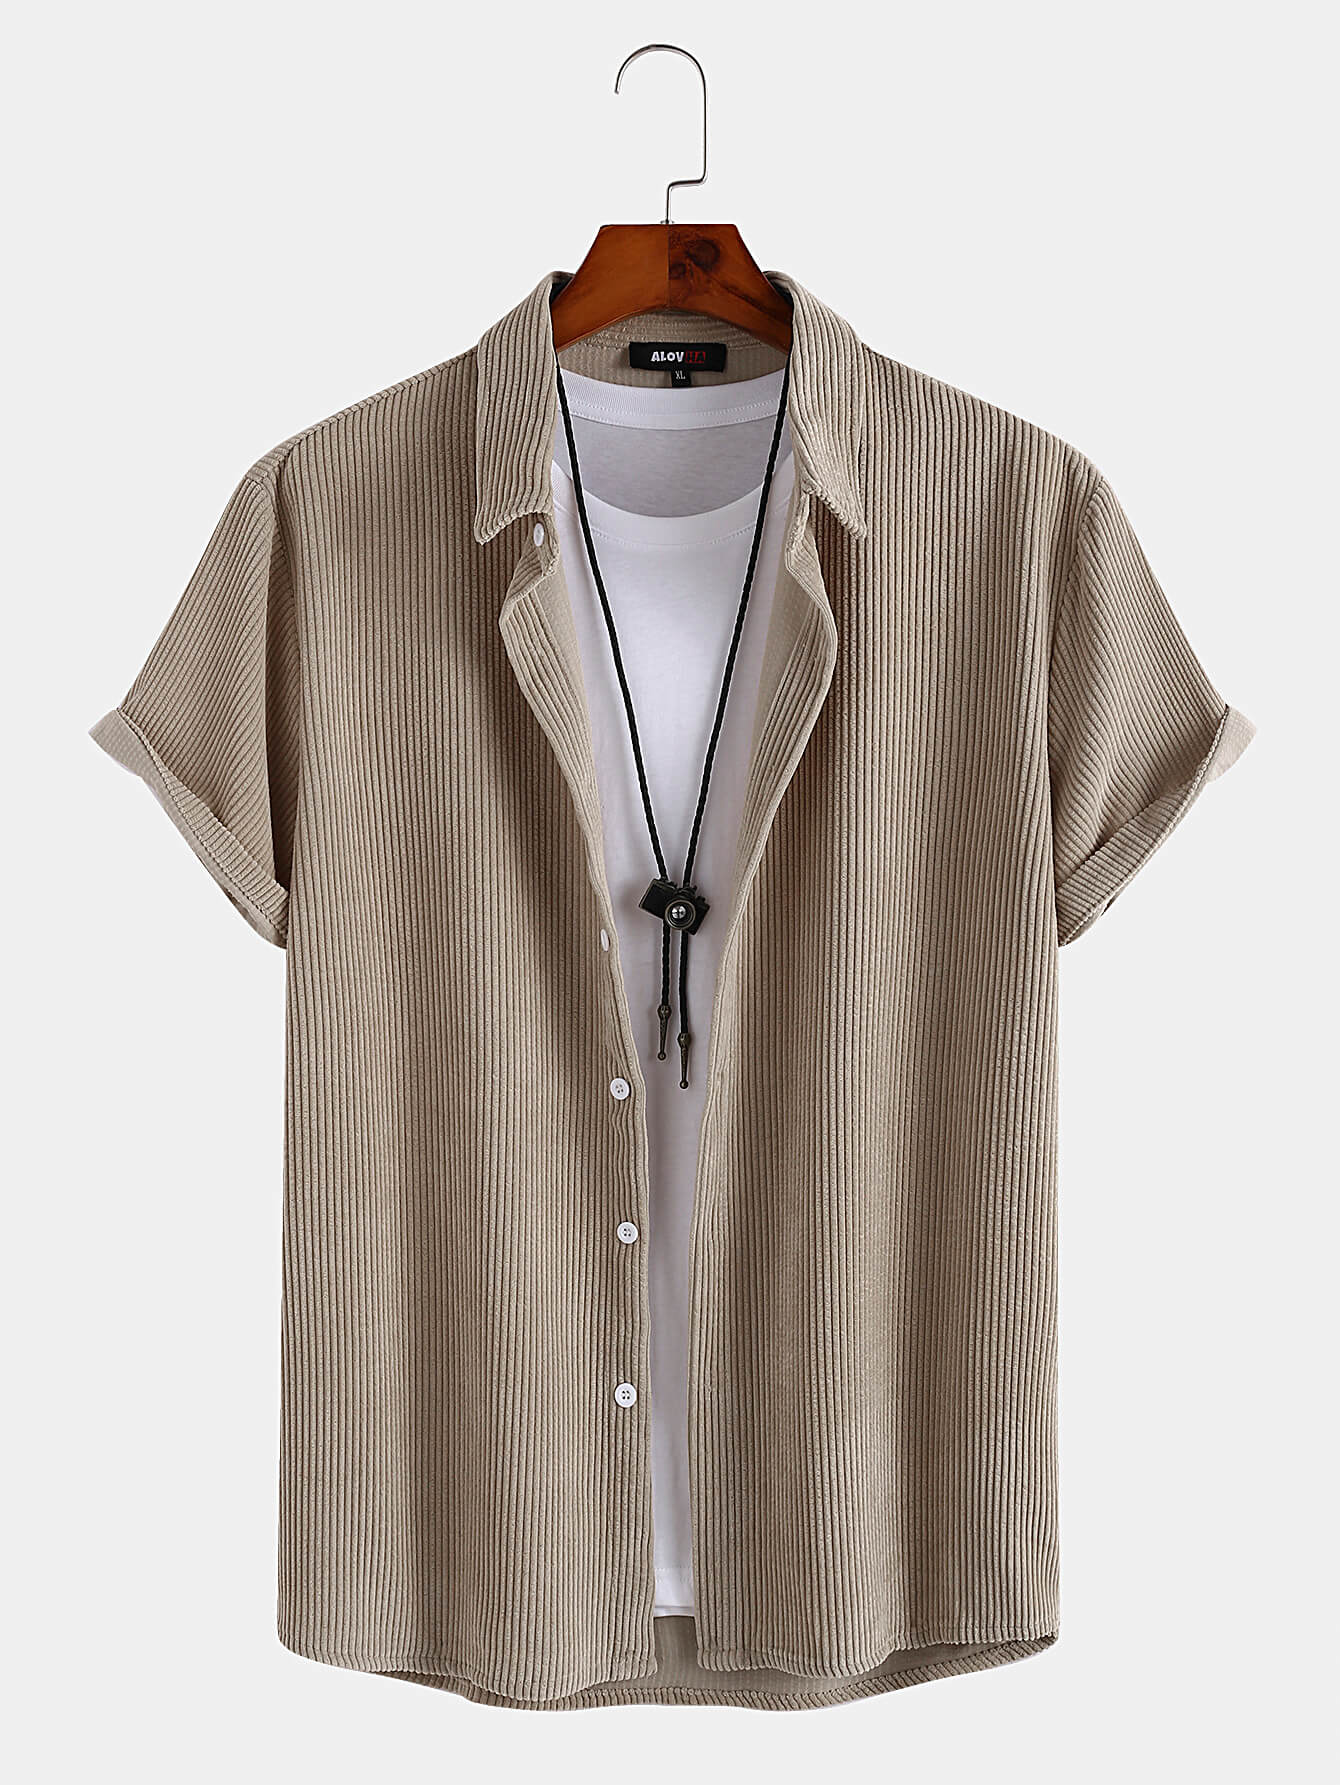 Mens Corduroy Solid Color Casual Summer Short Sleeves Button Shirt